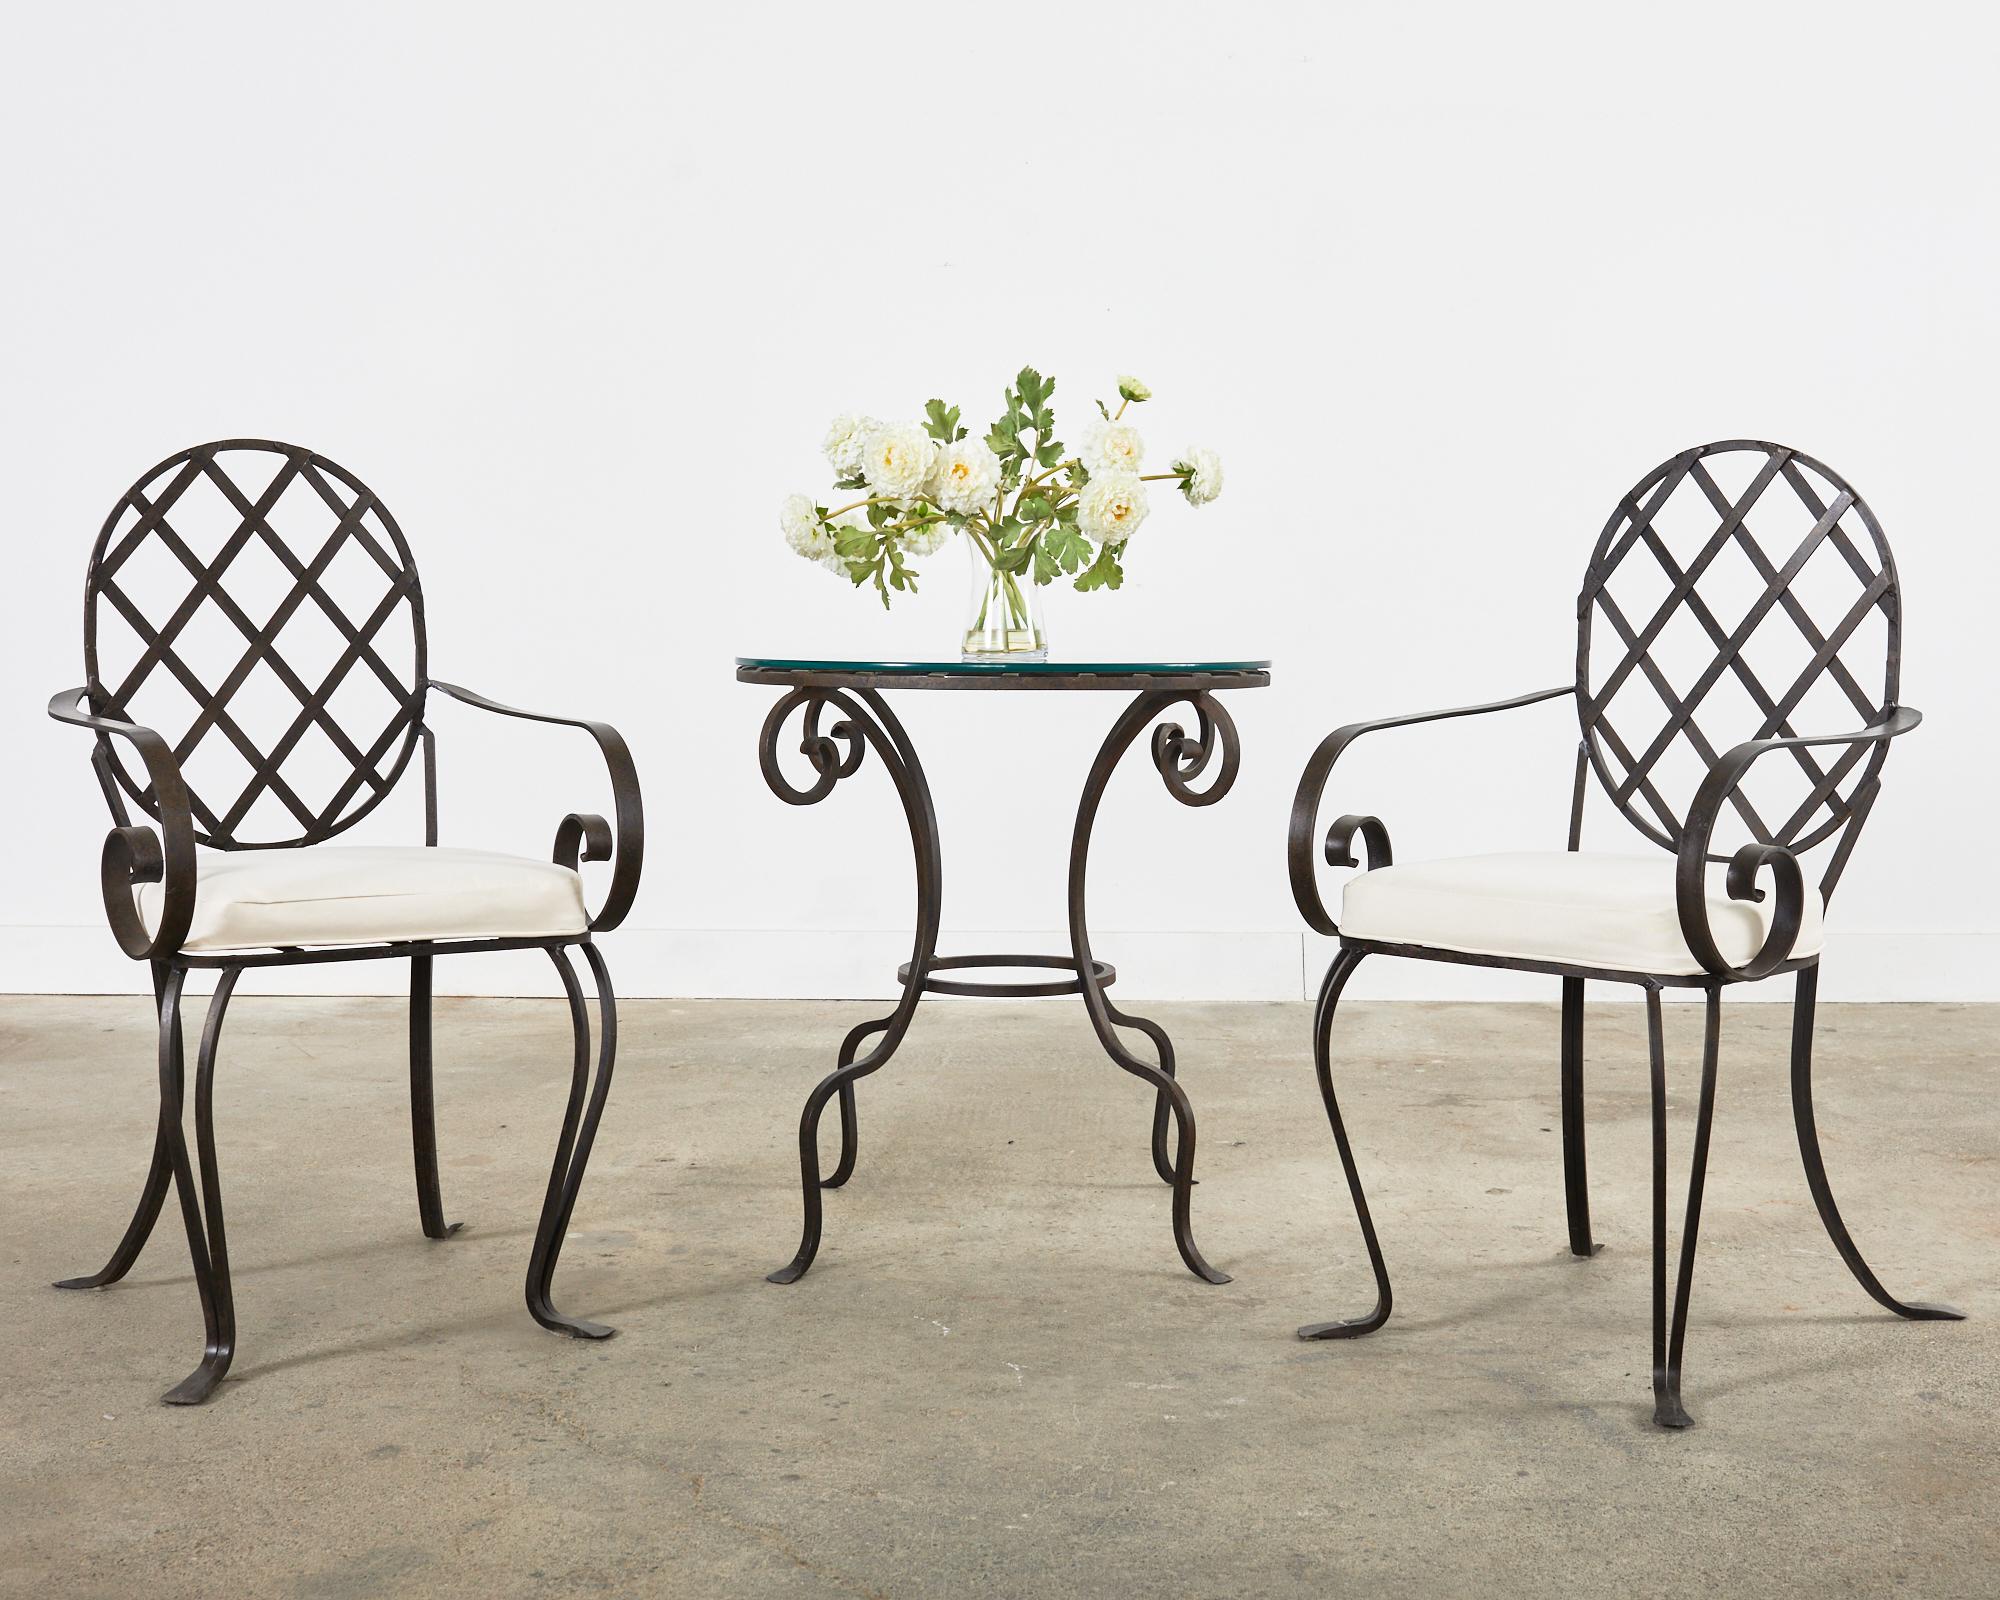 Distinctive set of four wrought iron patio and garden dining armchairs featuring an iron lattice inset seat and back in the style of Rose Tarlow Melrose House, Los Angeles, CA. Produced by a foundry in Los Angeles with oval or cameo shaped backs